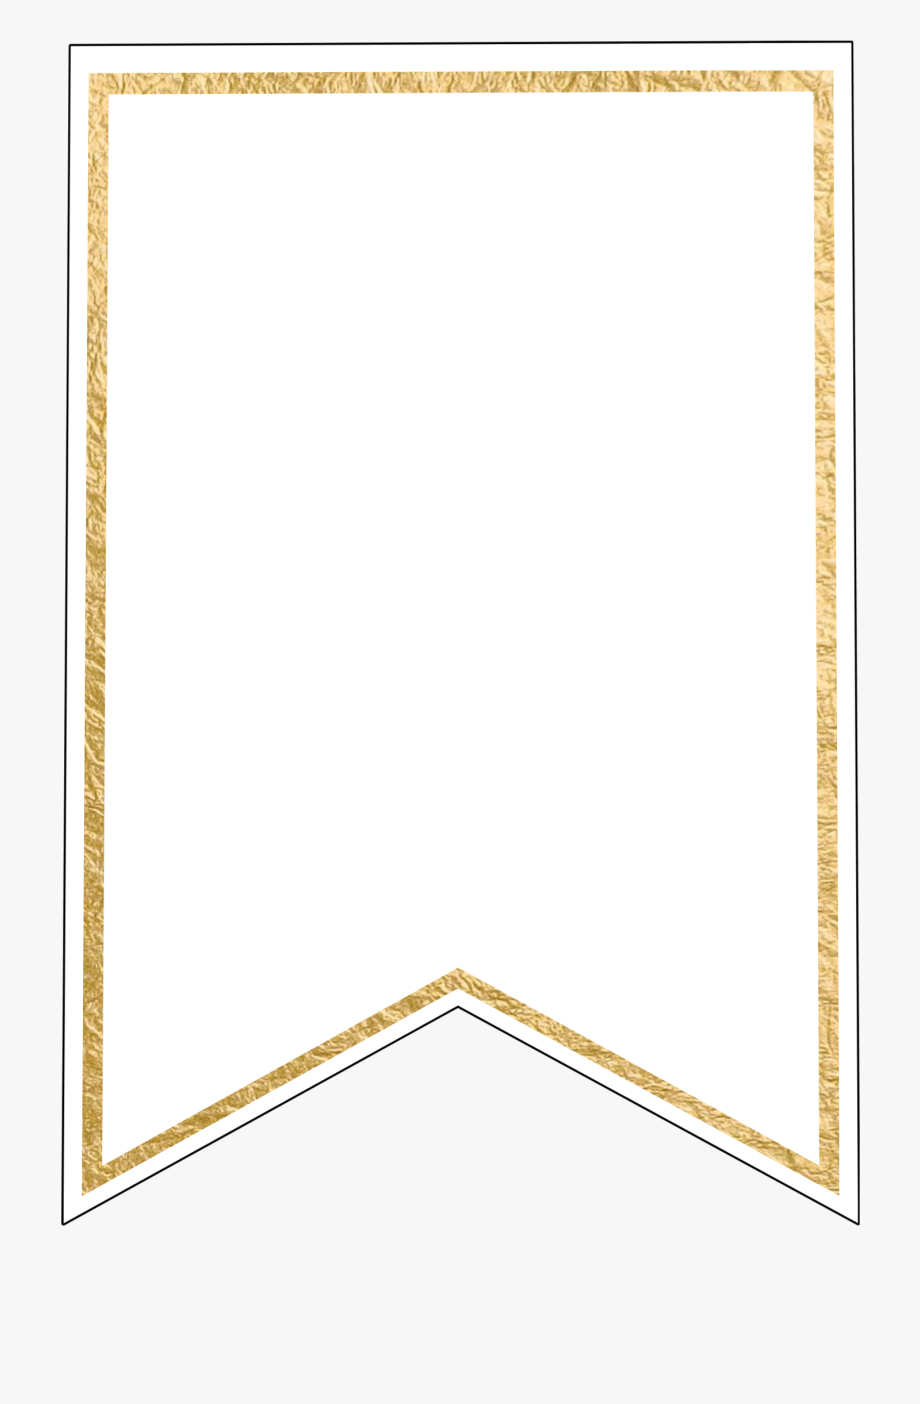 Free Pennant Banner Template, Download Free Clip Art, – Gold In Printable Pennant Banner Template Free